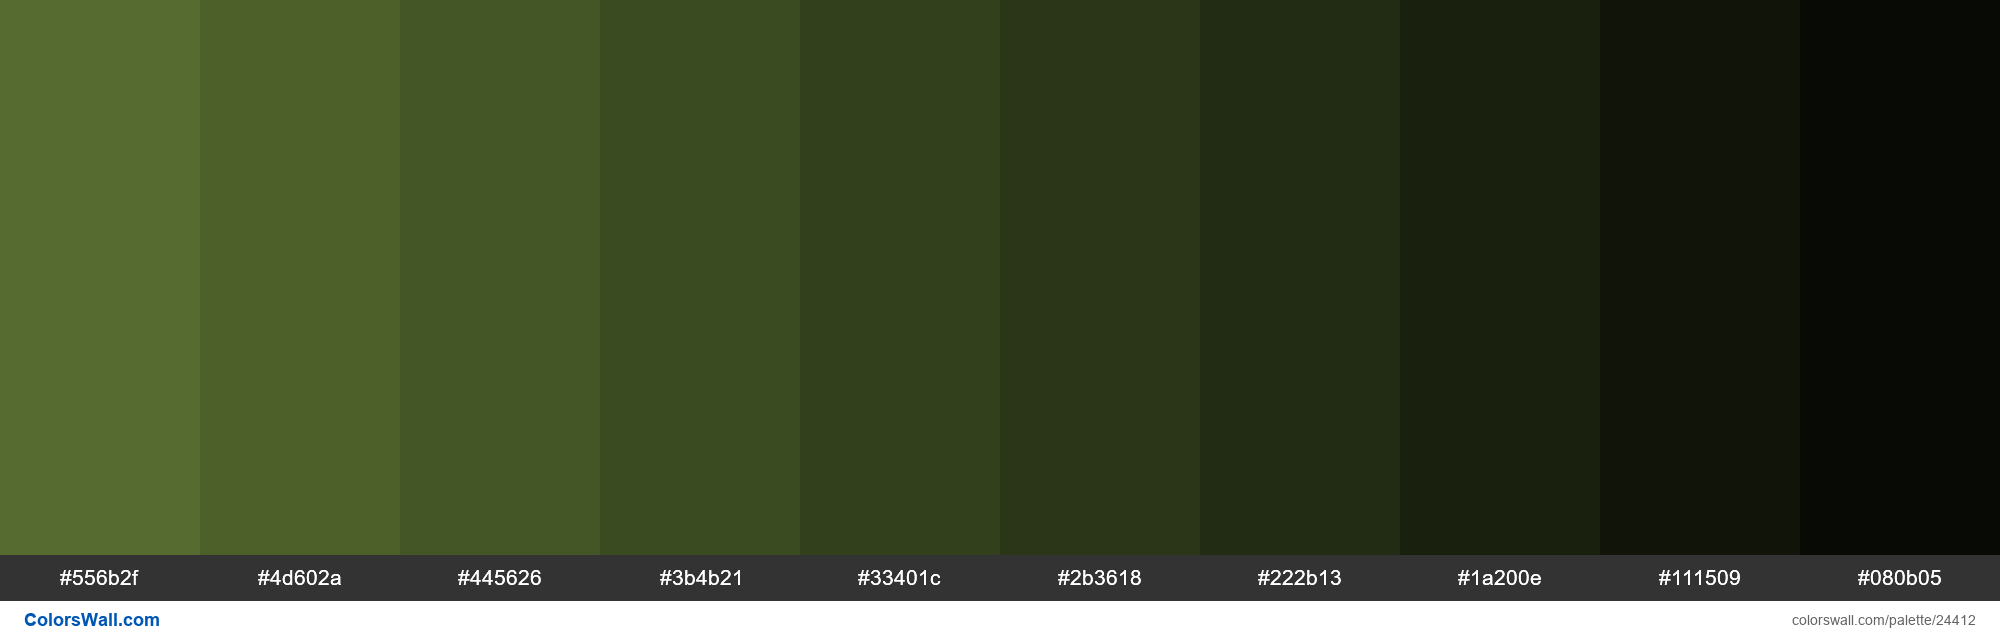 Shades of Dark Olive Green #556B2F hex color - ColorsWall